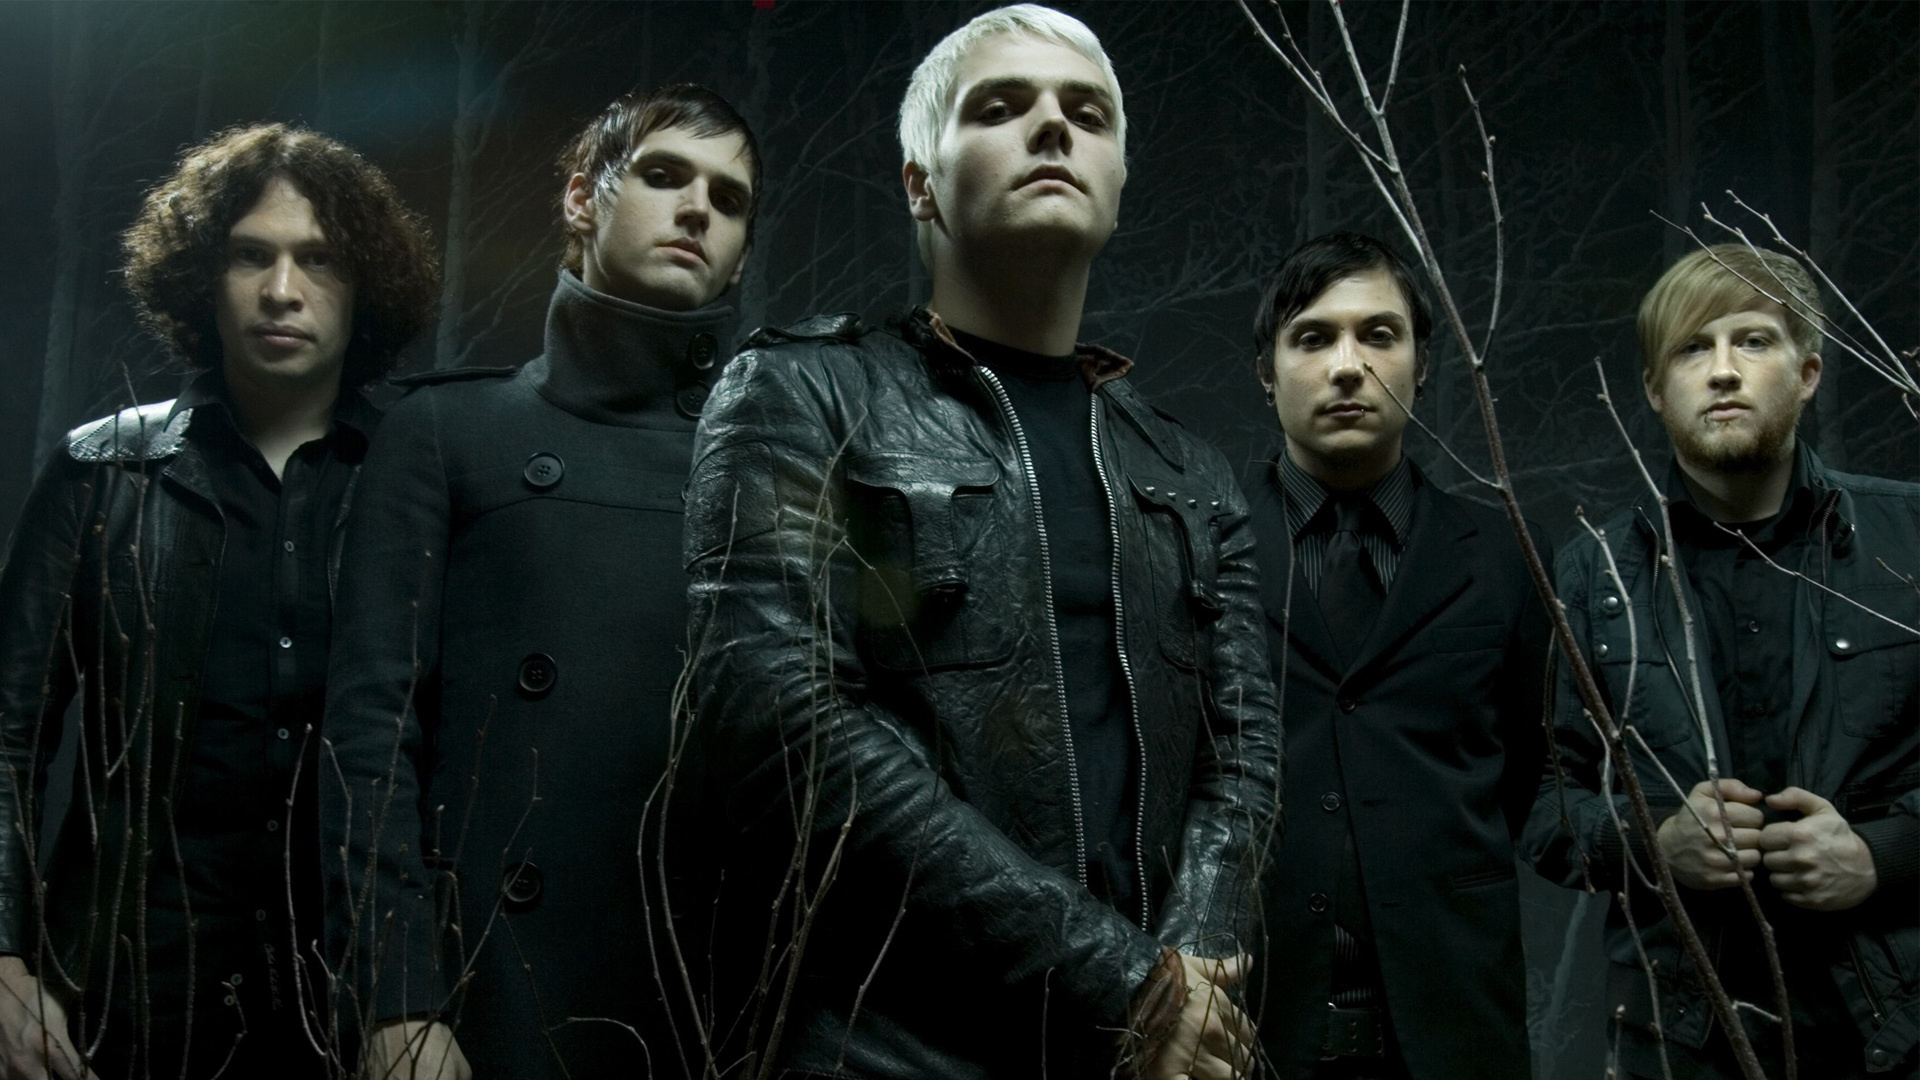 MCR (My Chemical Romance), Wallpaper collection, Band imagery, Fan favorites, 1920x1080 Full HD Desktop